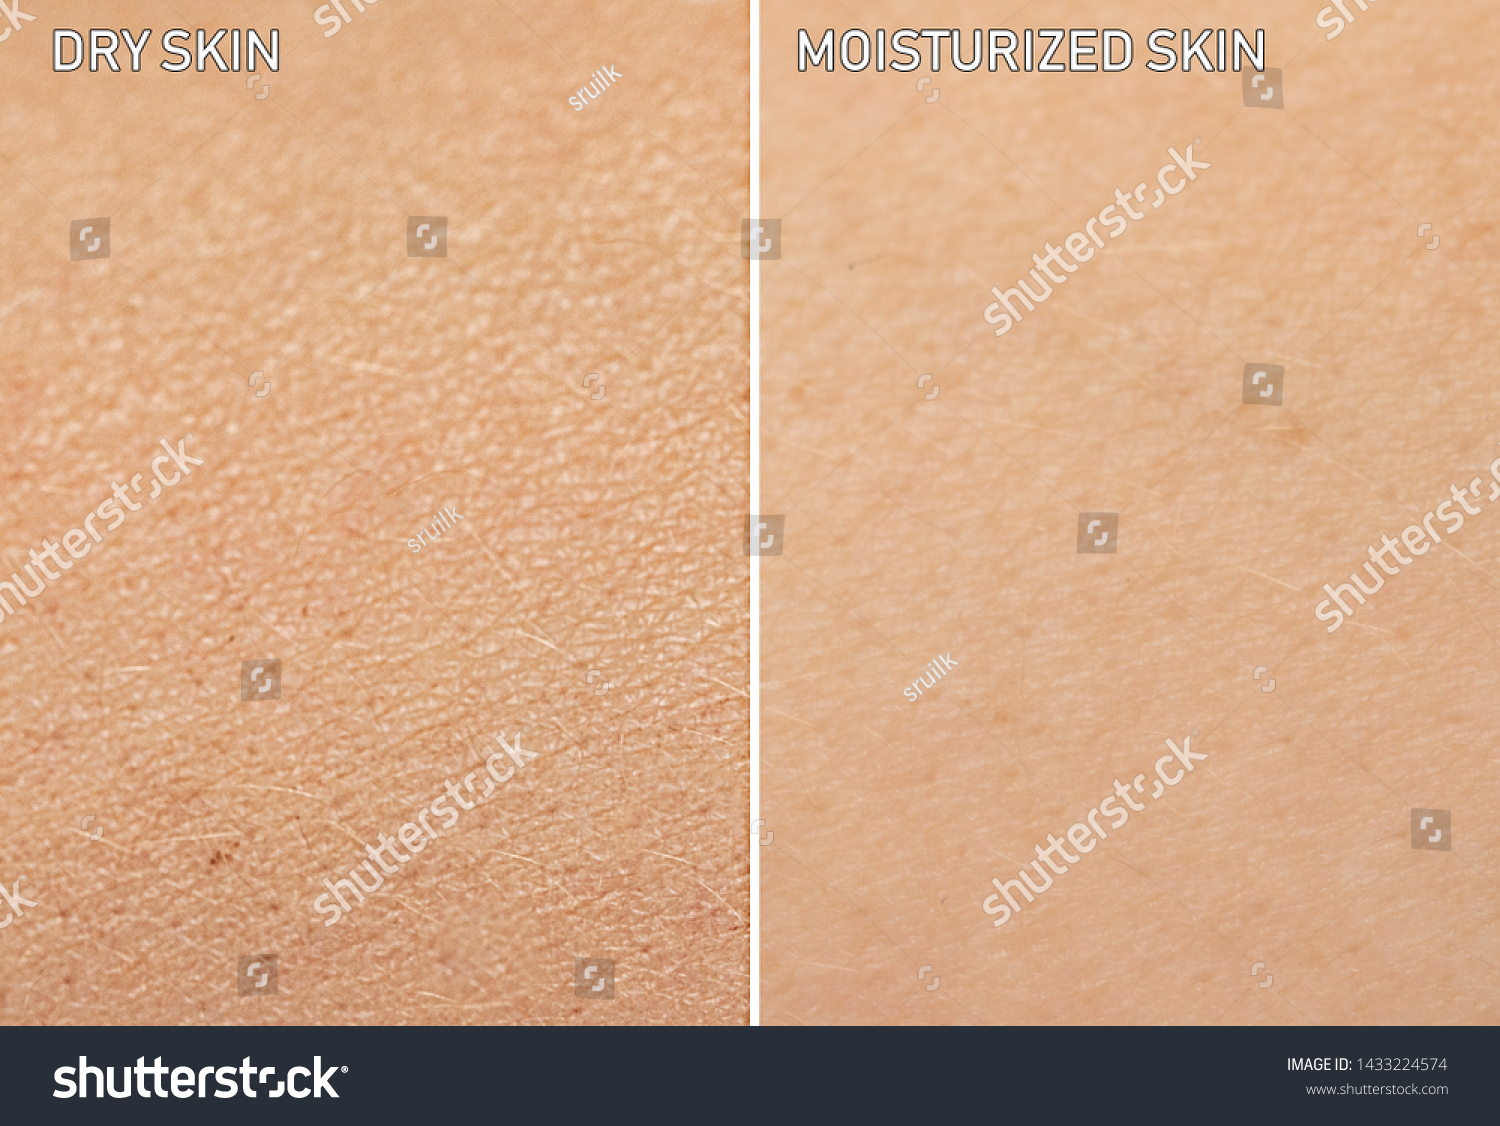 An extreme close up view of human skin, before and after moisturizer is applied. One showing dry skin, and the other showing healthy moisturized skin. #1433224574